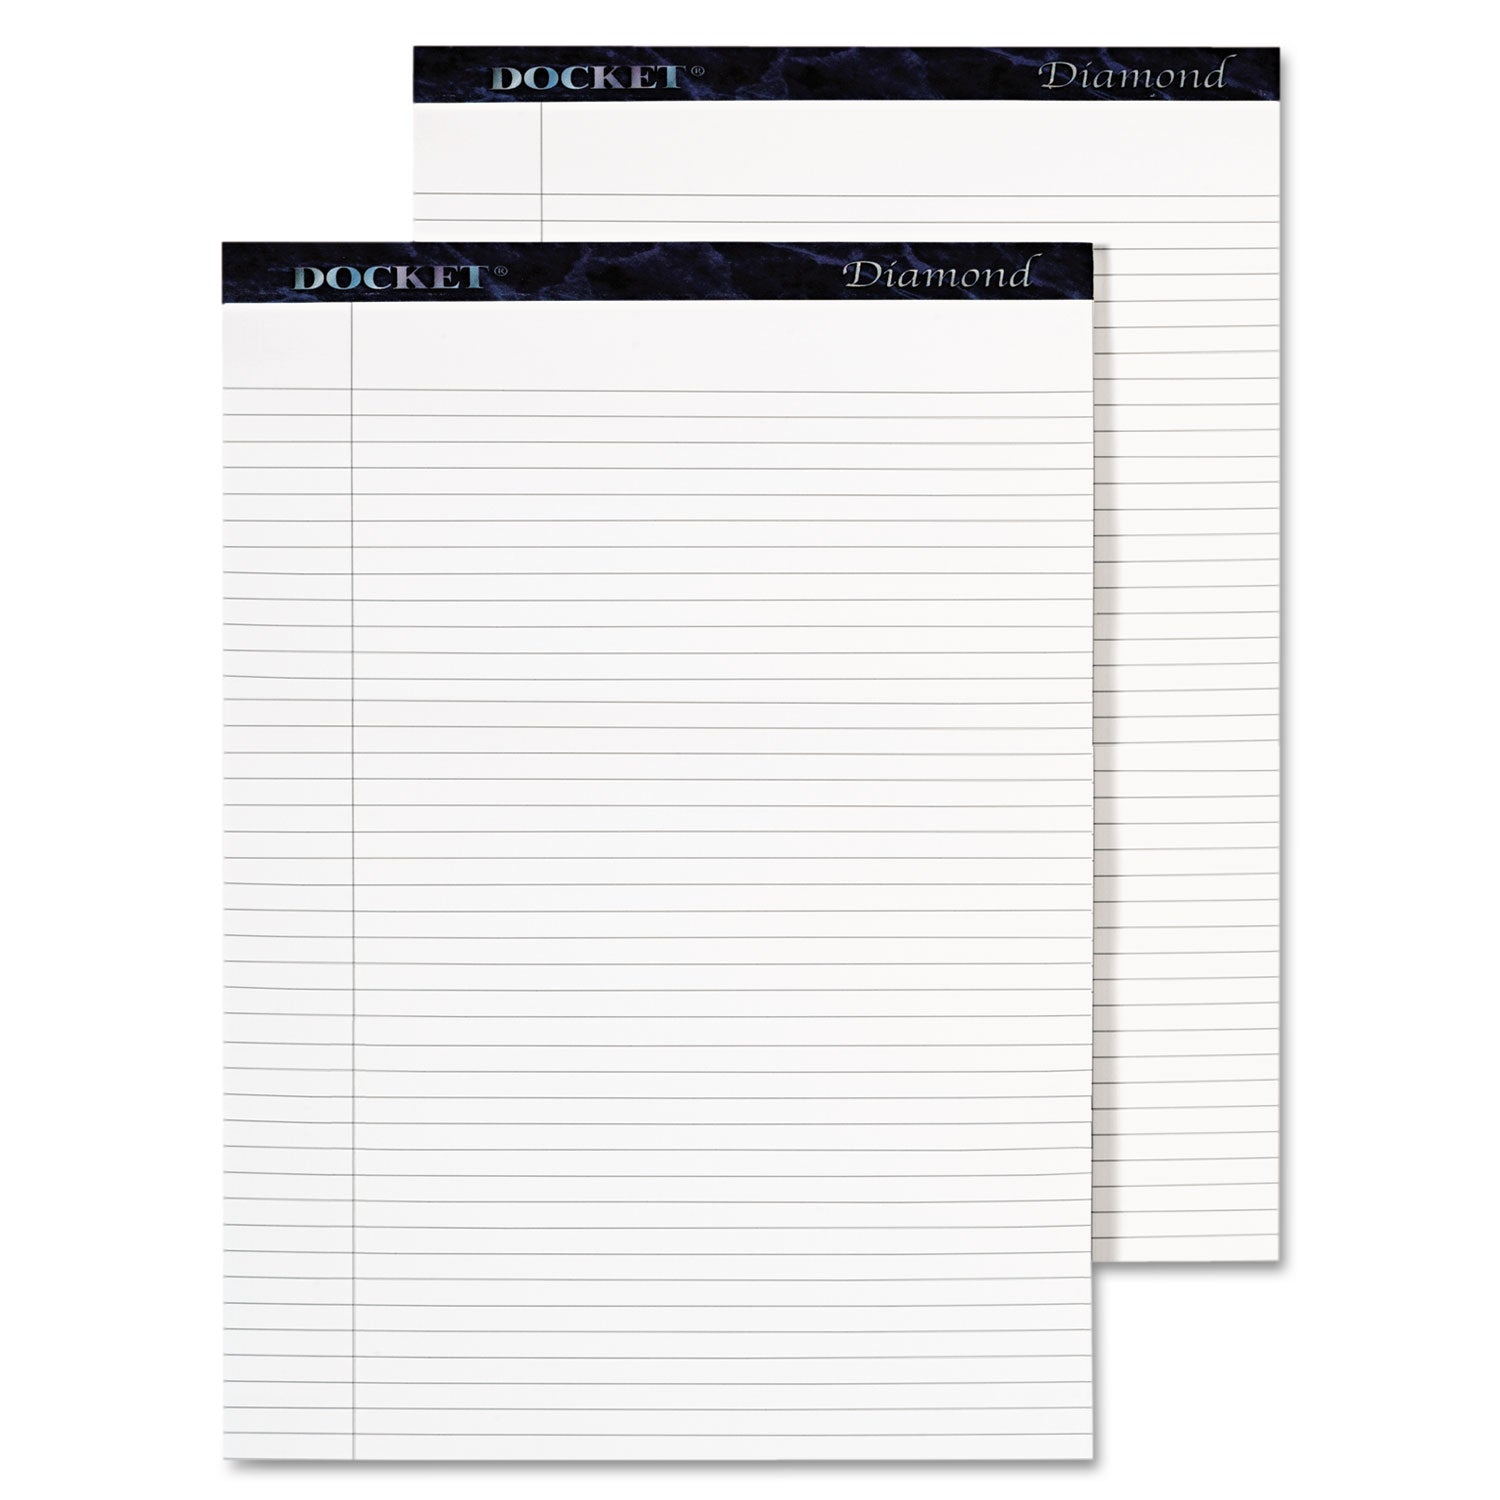 docket-diamond-ruled-pads-wide-legal-rule-50-white-85-x-1175-sheets-2-box_top63975 - 1